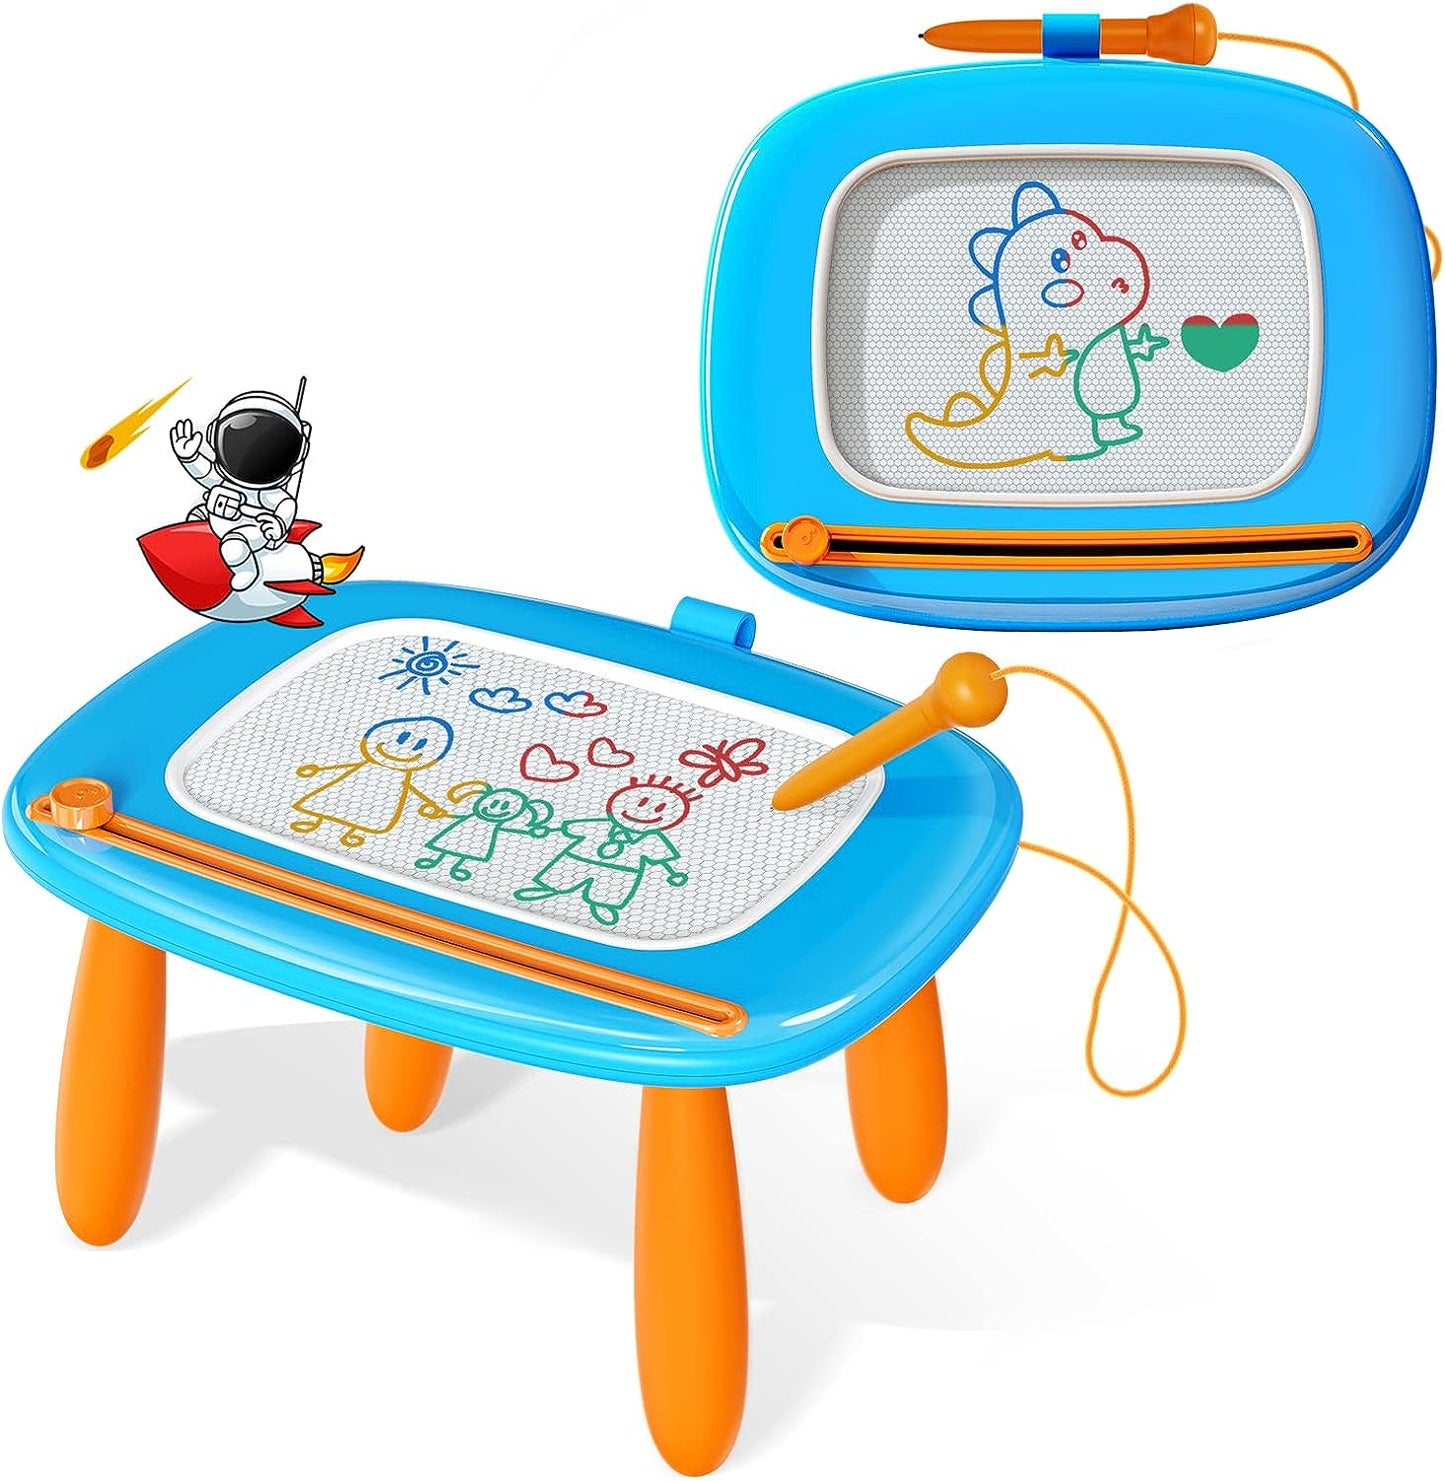 KIKIDEX Toddlers Toys Age 1-3, Magnetic Drawing Board